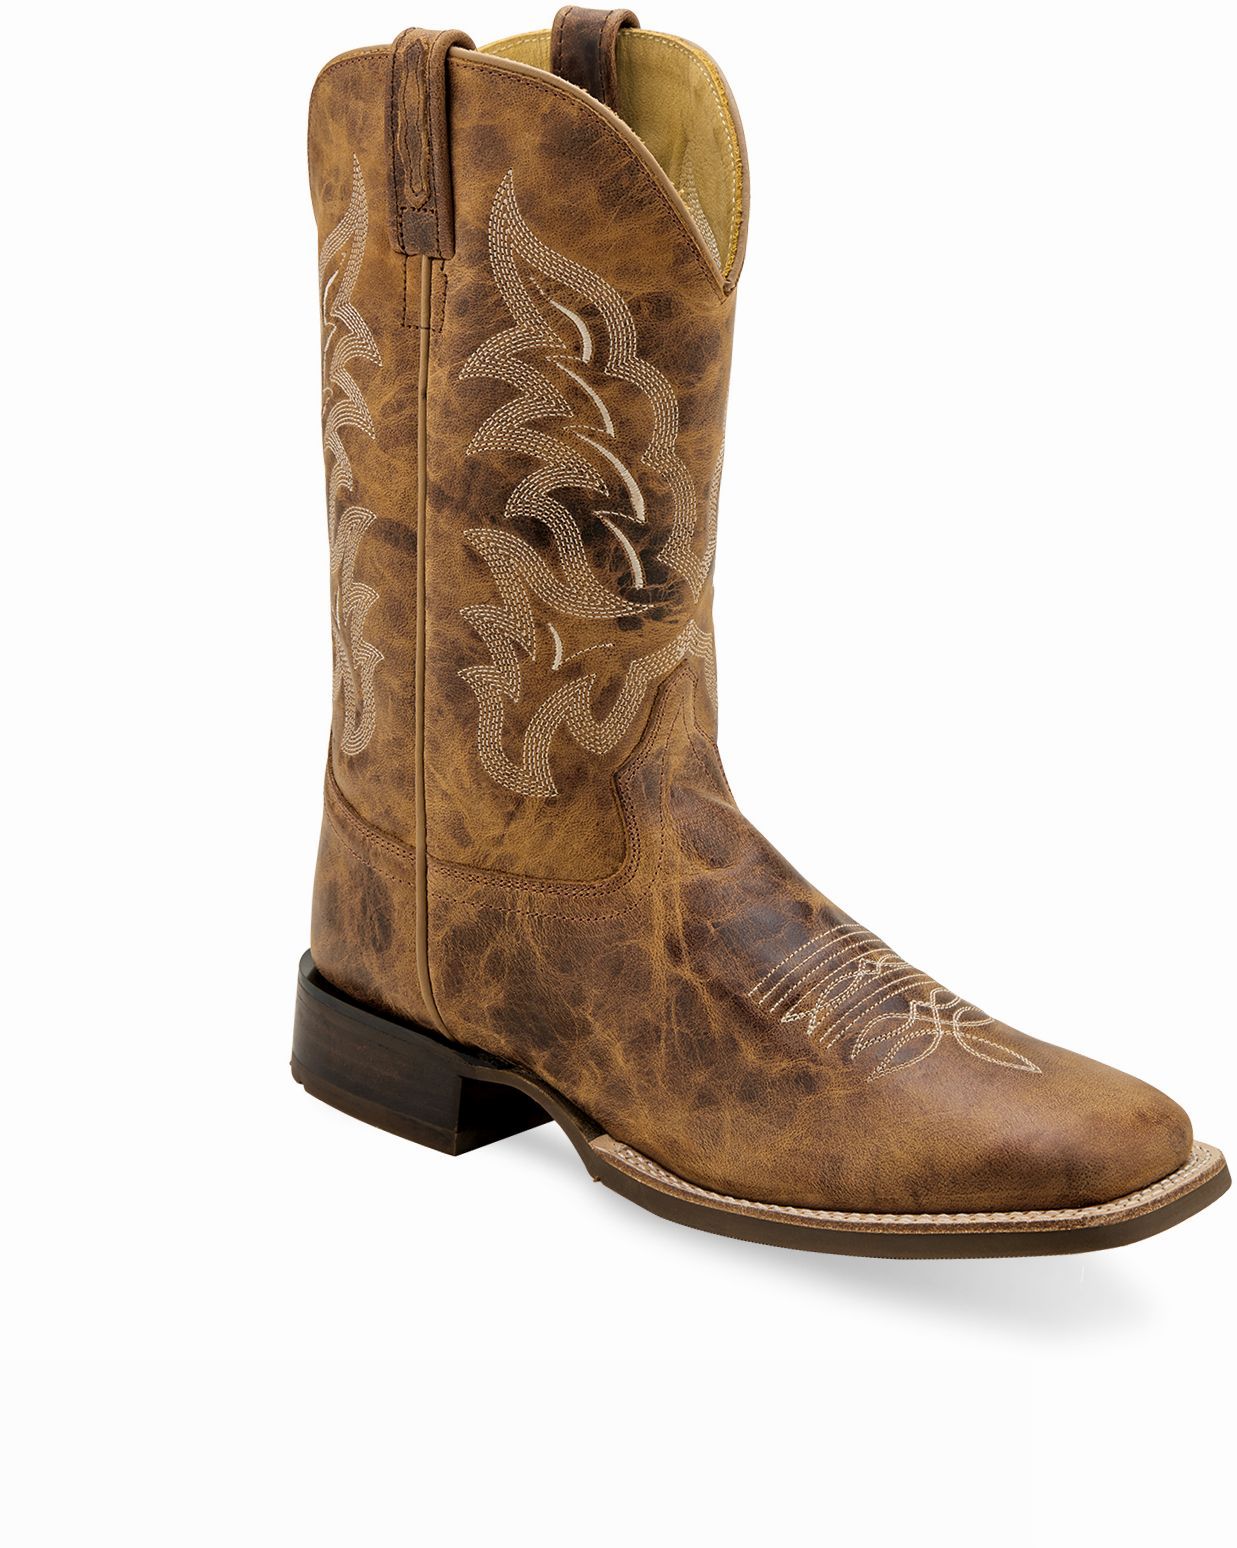 Old West Burnt Tan Men's Broad Square Toe Boots